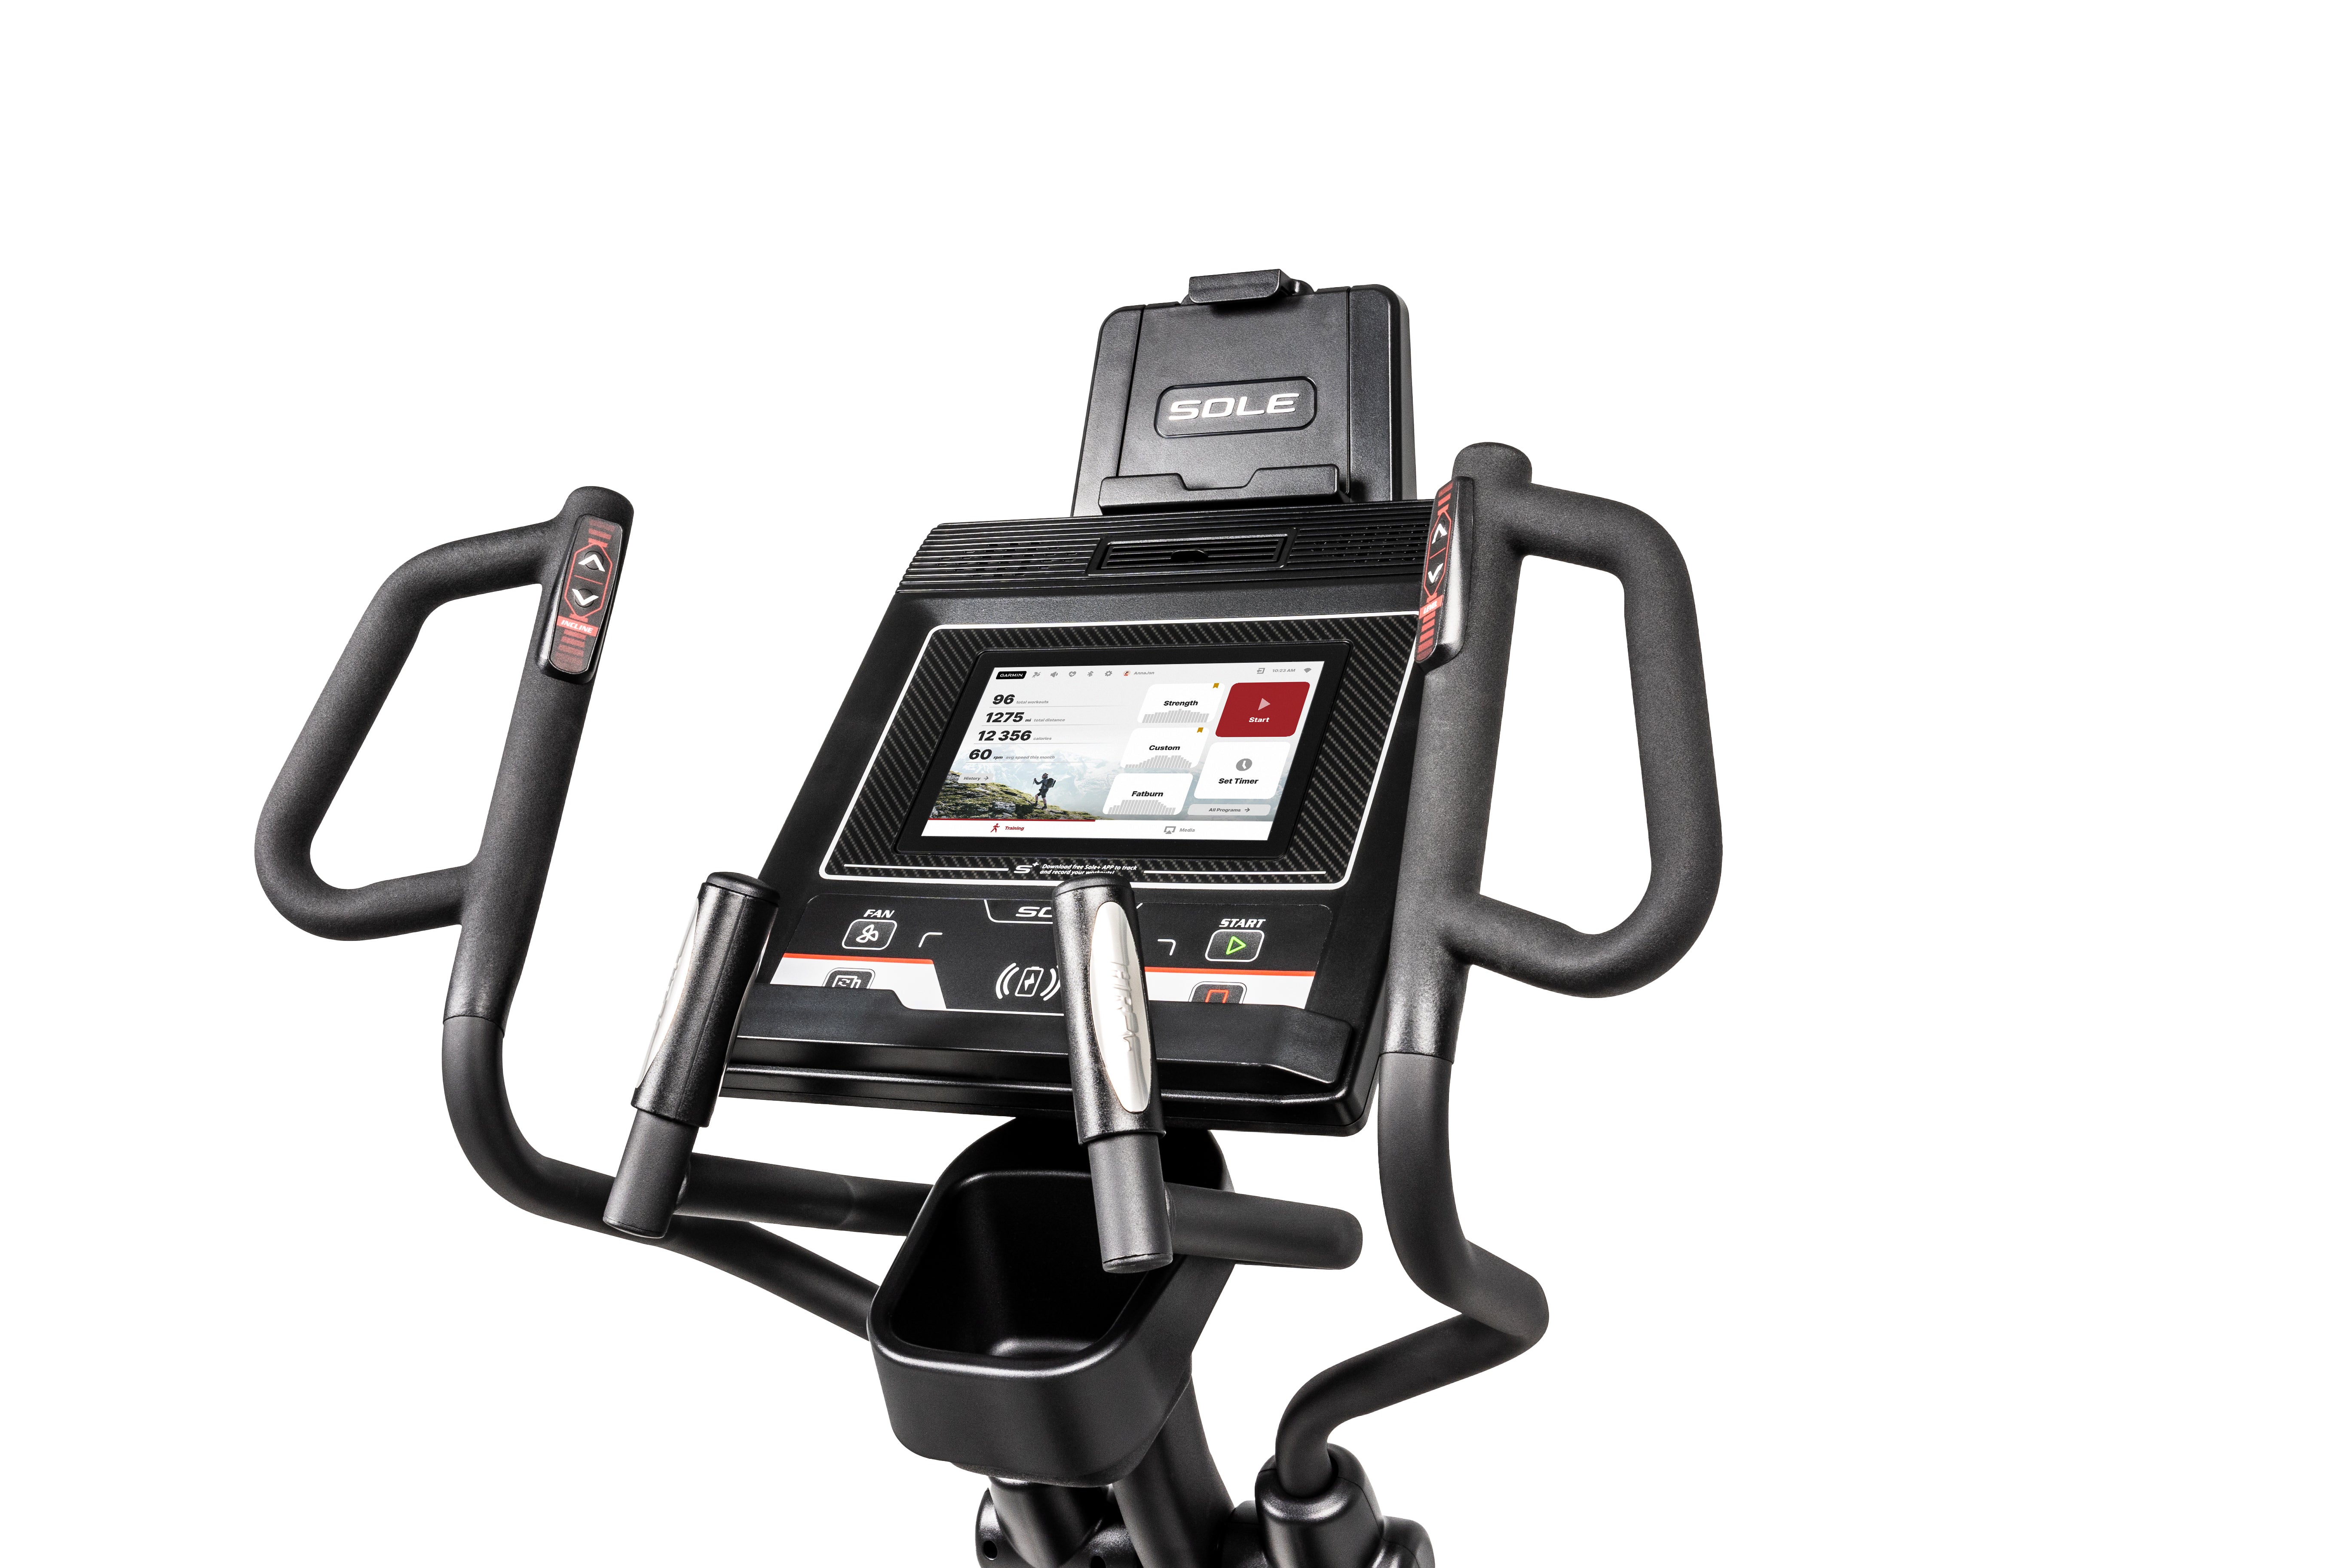 Angled close-up of the Sole E35 elliptical machine's console and handlebar area. The digital touchscreen showcases various fitness metrics on a map interface. Beneath the screen are tactile buttons, including those labeled "CAL", "SC", and "START". The machine's handlebars, one with heart rate sensors, have arrowed adjustment buttons. A cup holder is situated below the console. The design features shades of black and gray, with subtle silver and red details.